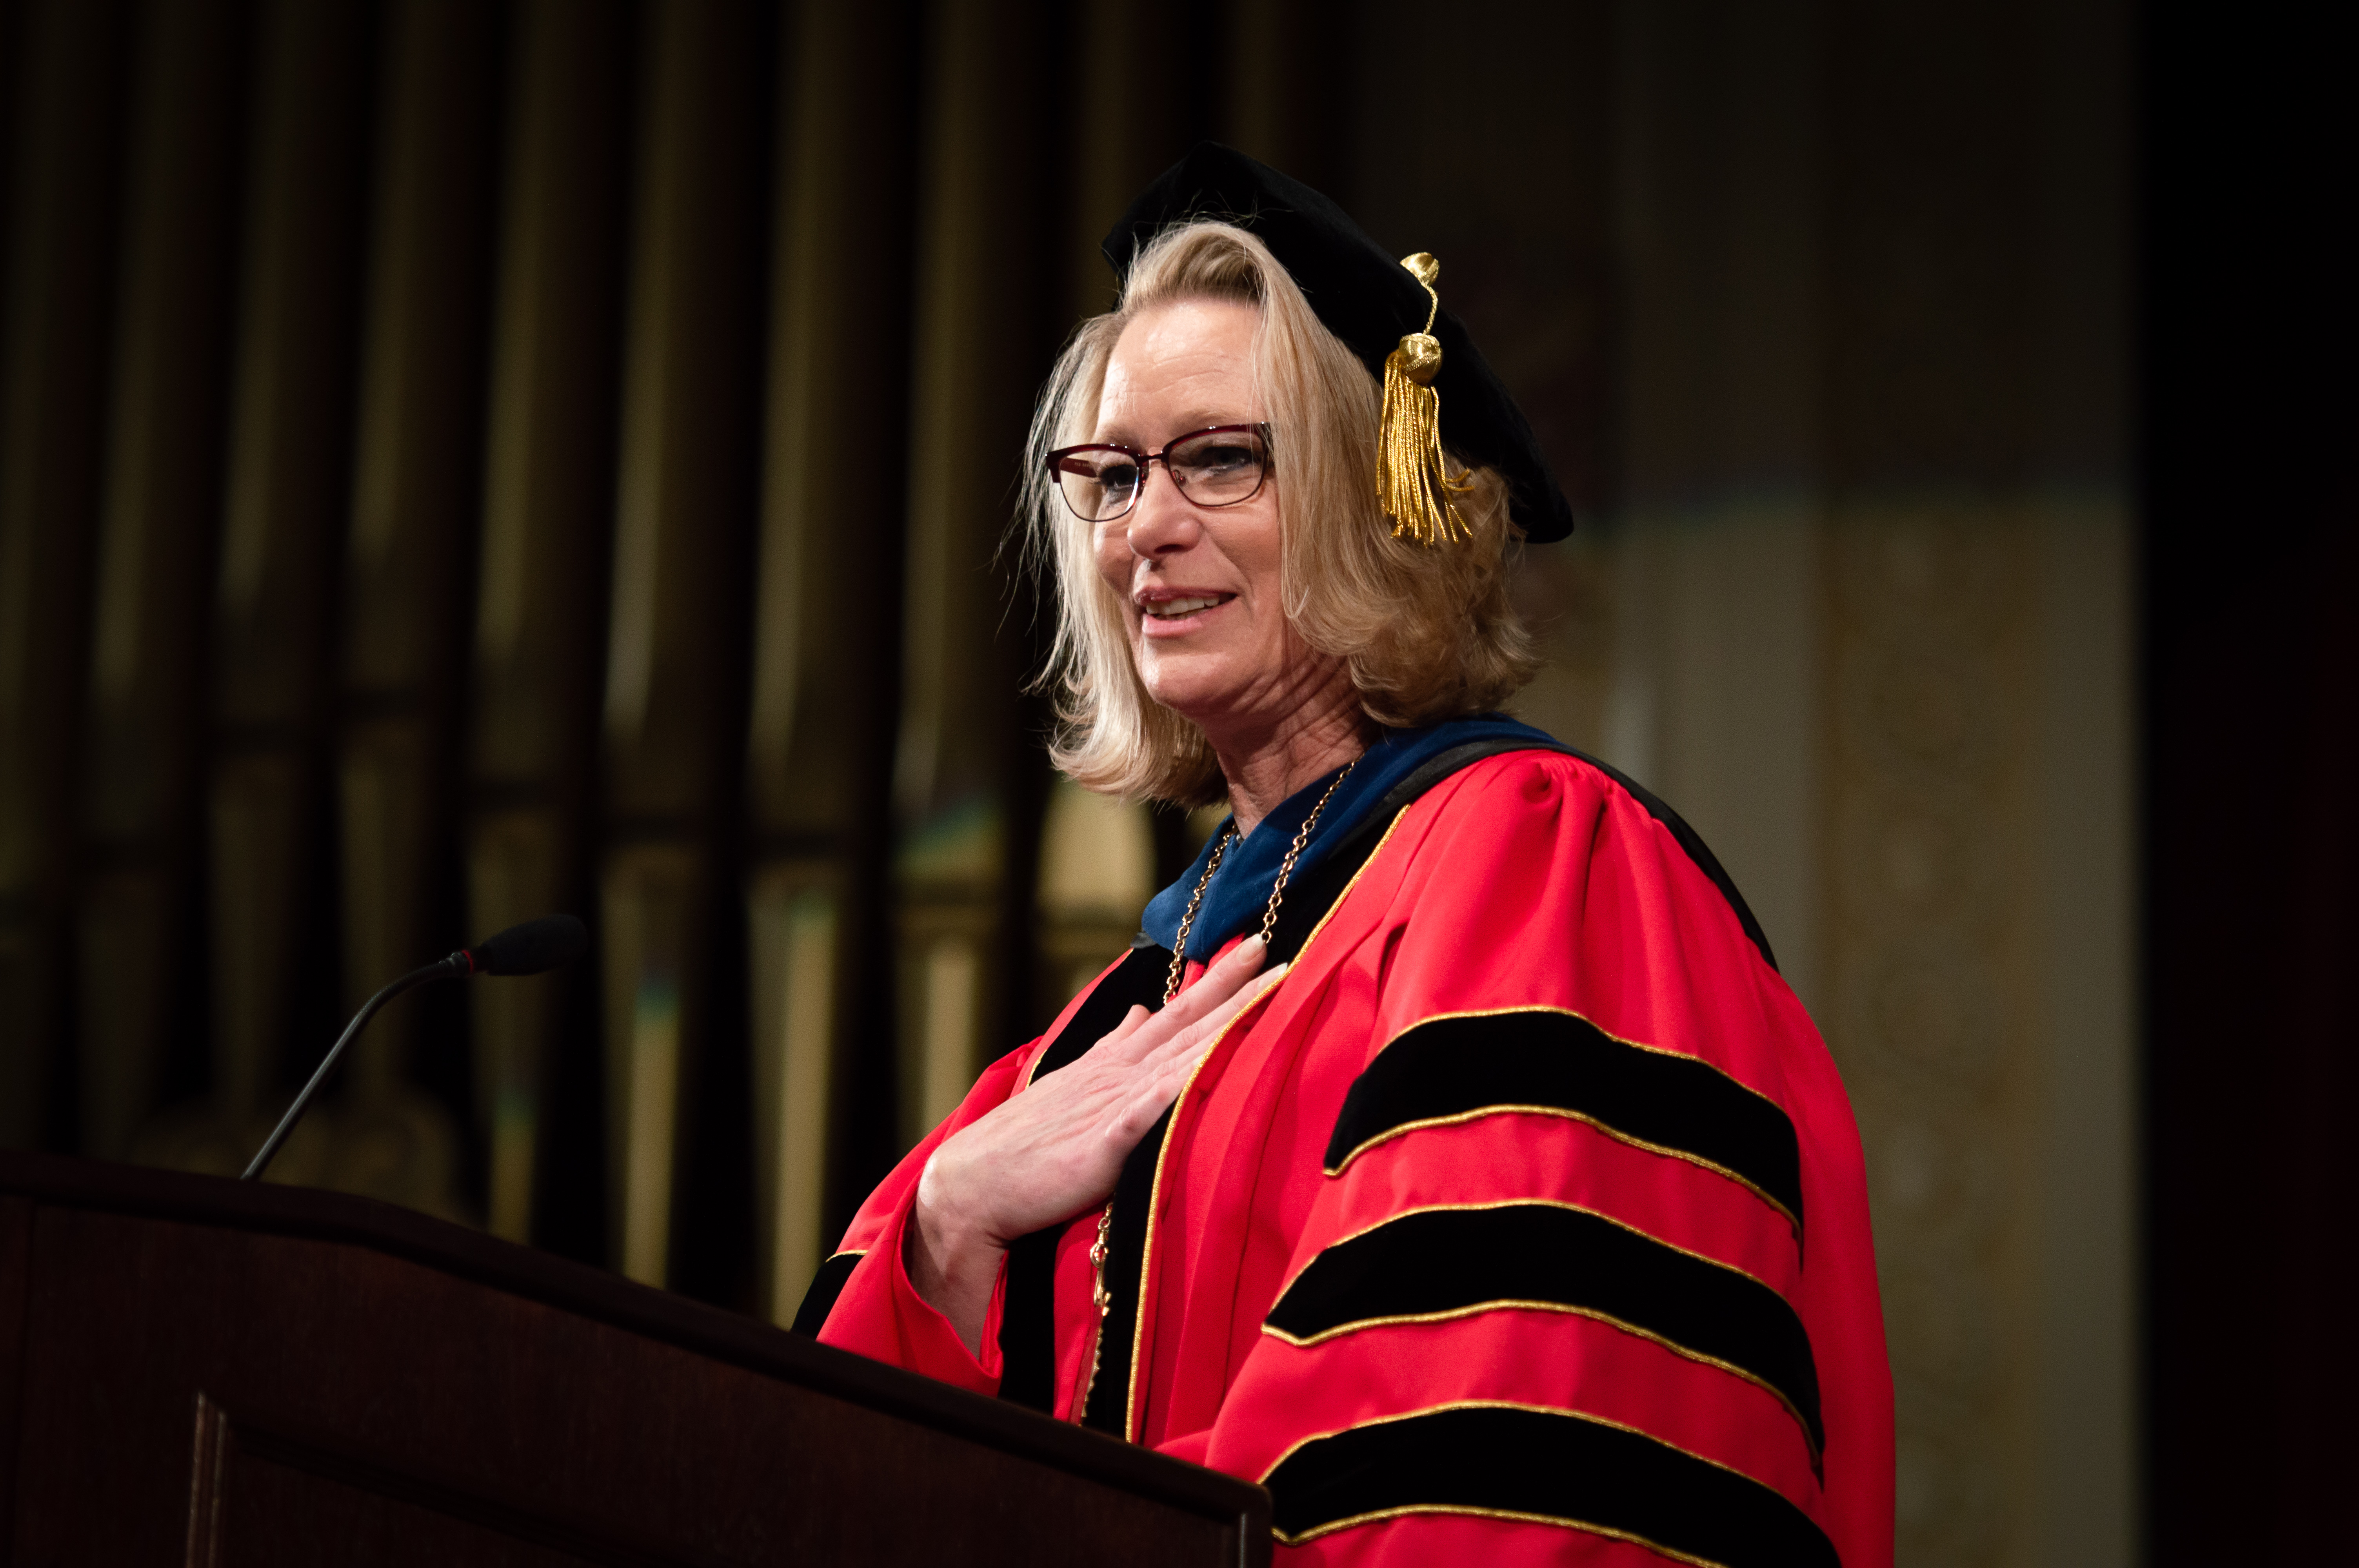 Sheila Gestring inaugurated as USD’s 18th president